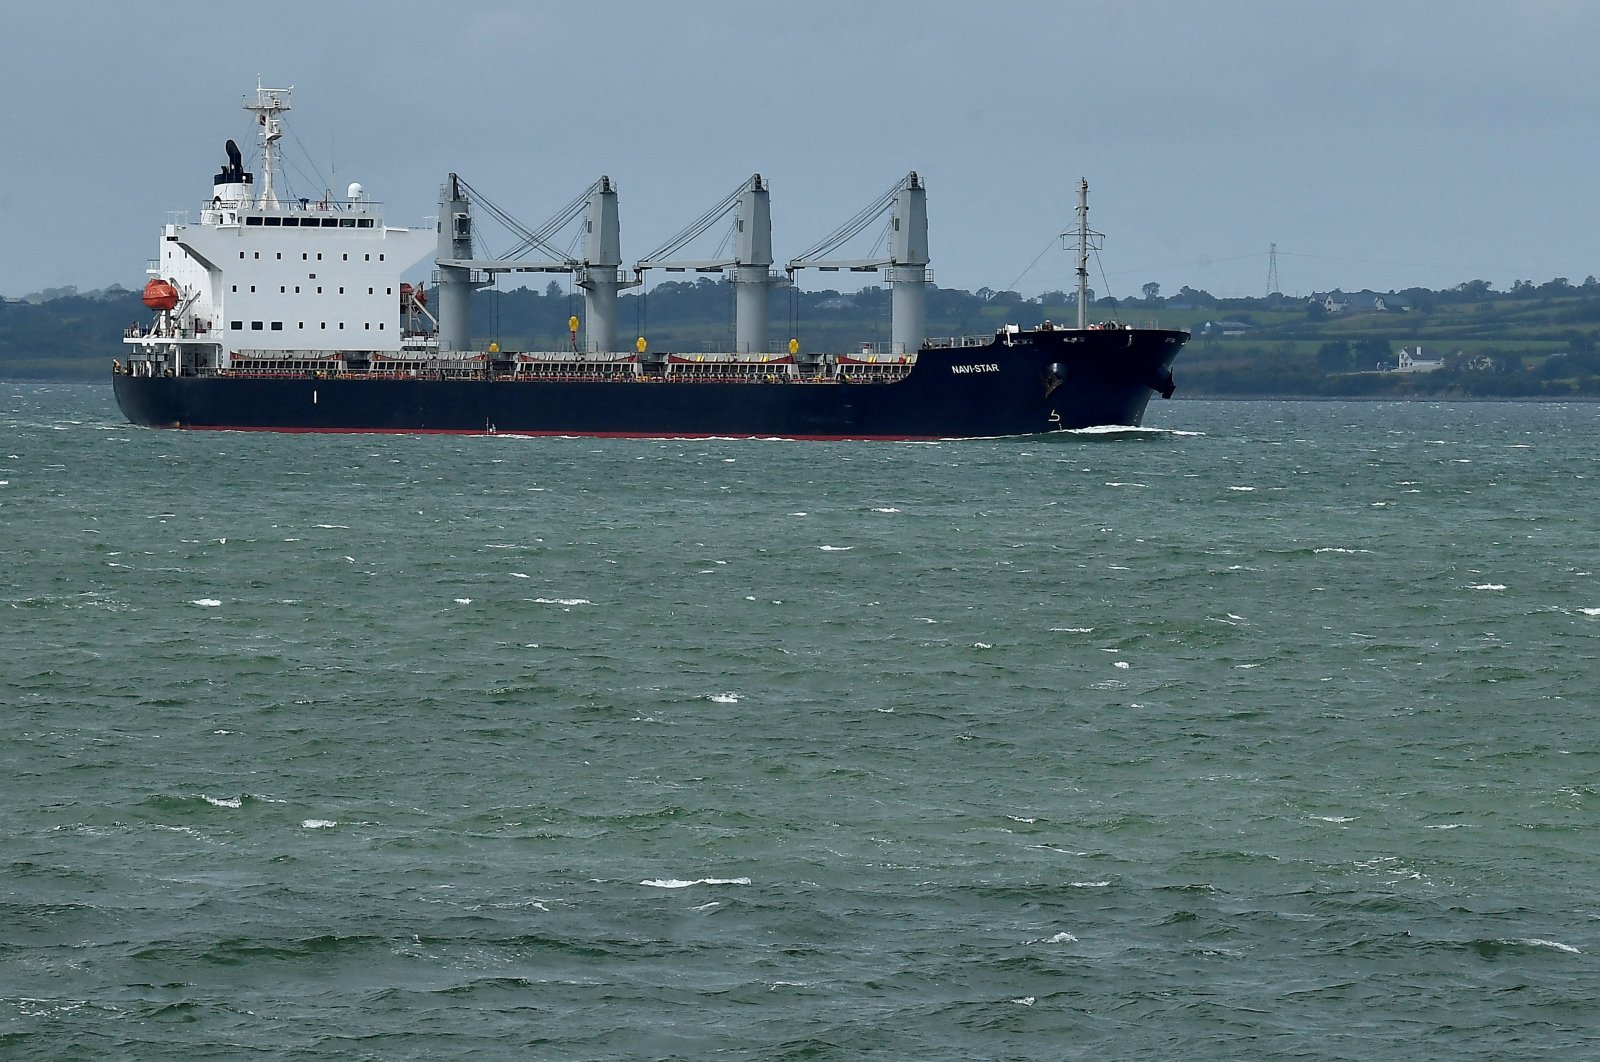 The Panama-flagged bulk carrier ship the Navi Star arrives at Foynes Port delivering 33,000 tons of Ukrainian corn to Ireland after departing from Odessa following the Black Sea grain initiative, in Foynes, Ireland, Aug. 20, 2022. (Reuters Photo)